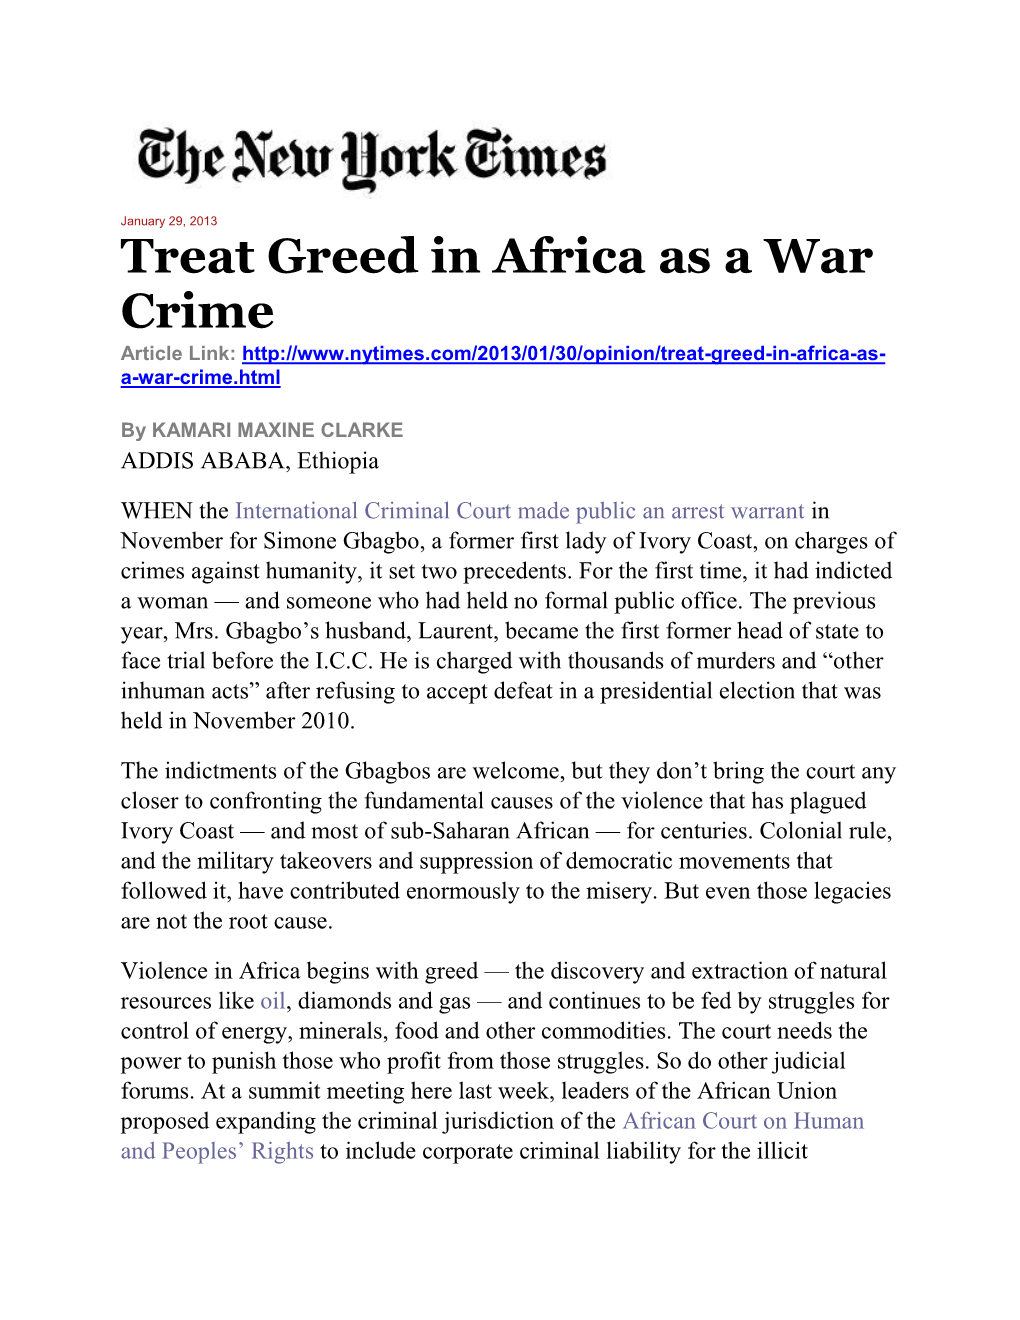 Treat Greed in Africa As a War Crime Article Link: A-War-Crime.Html